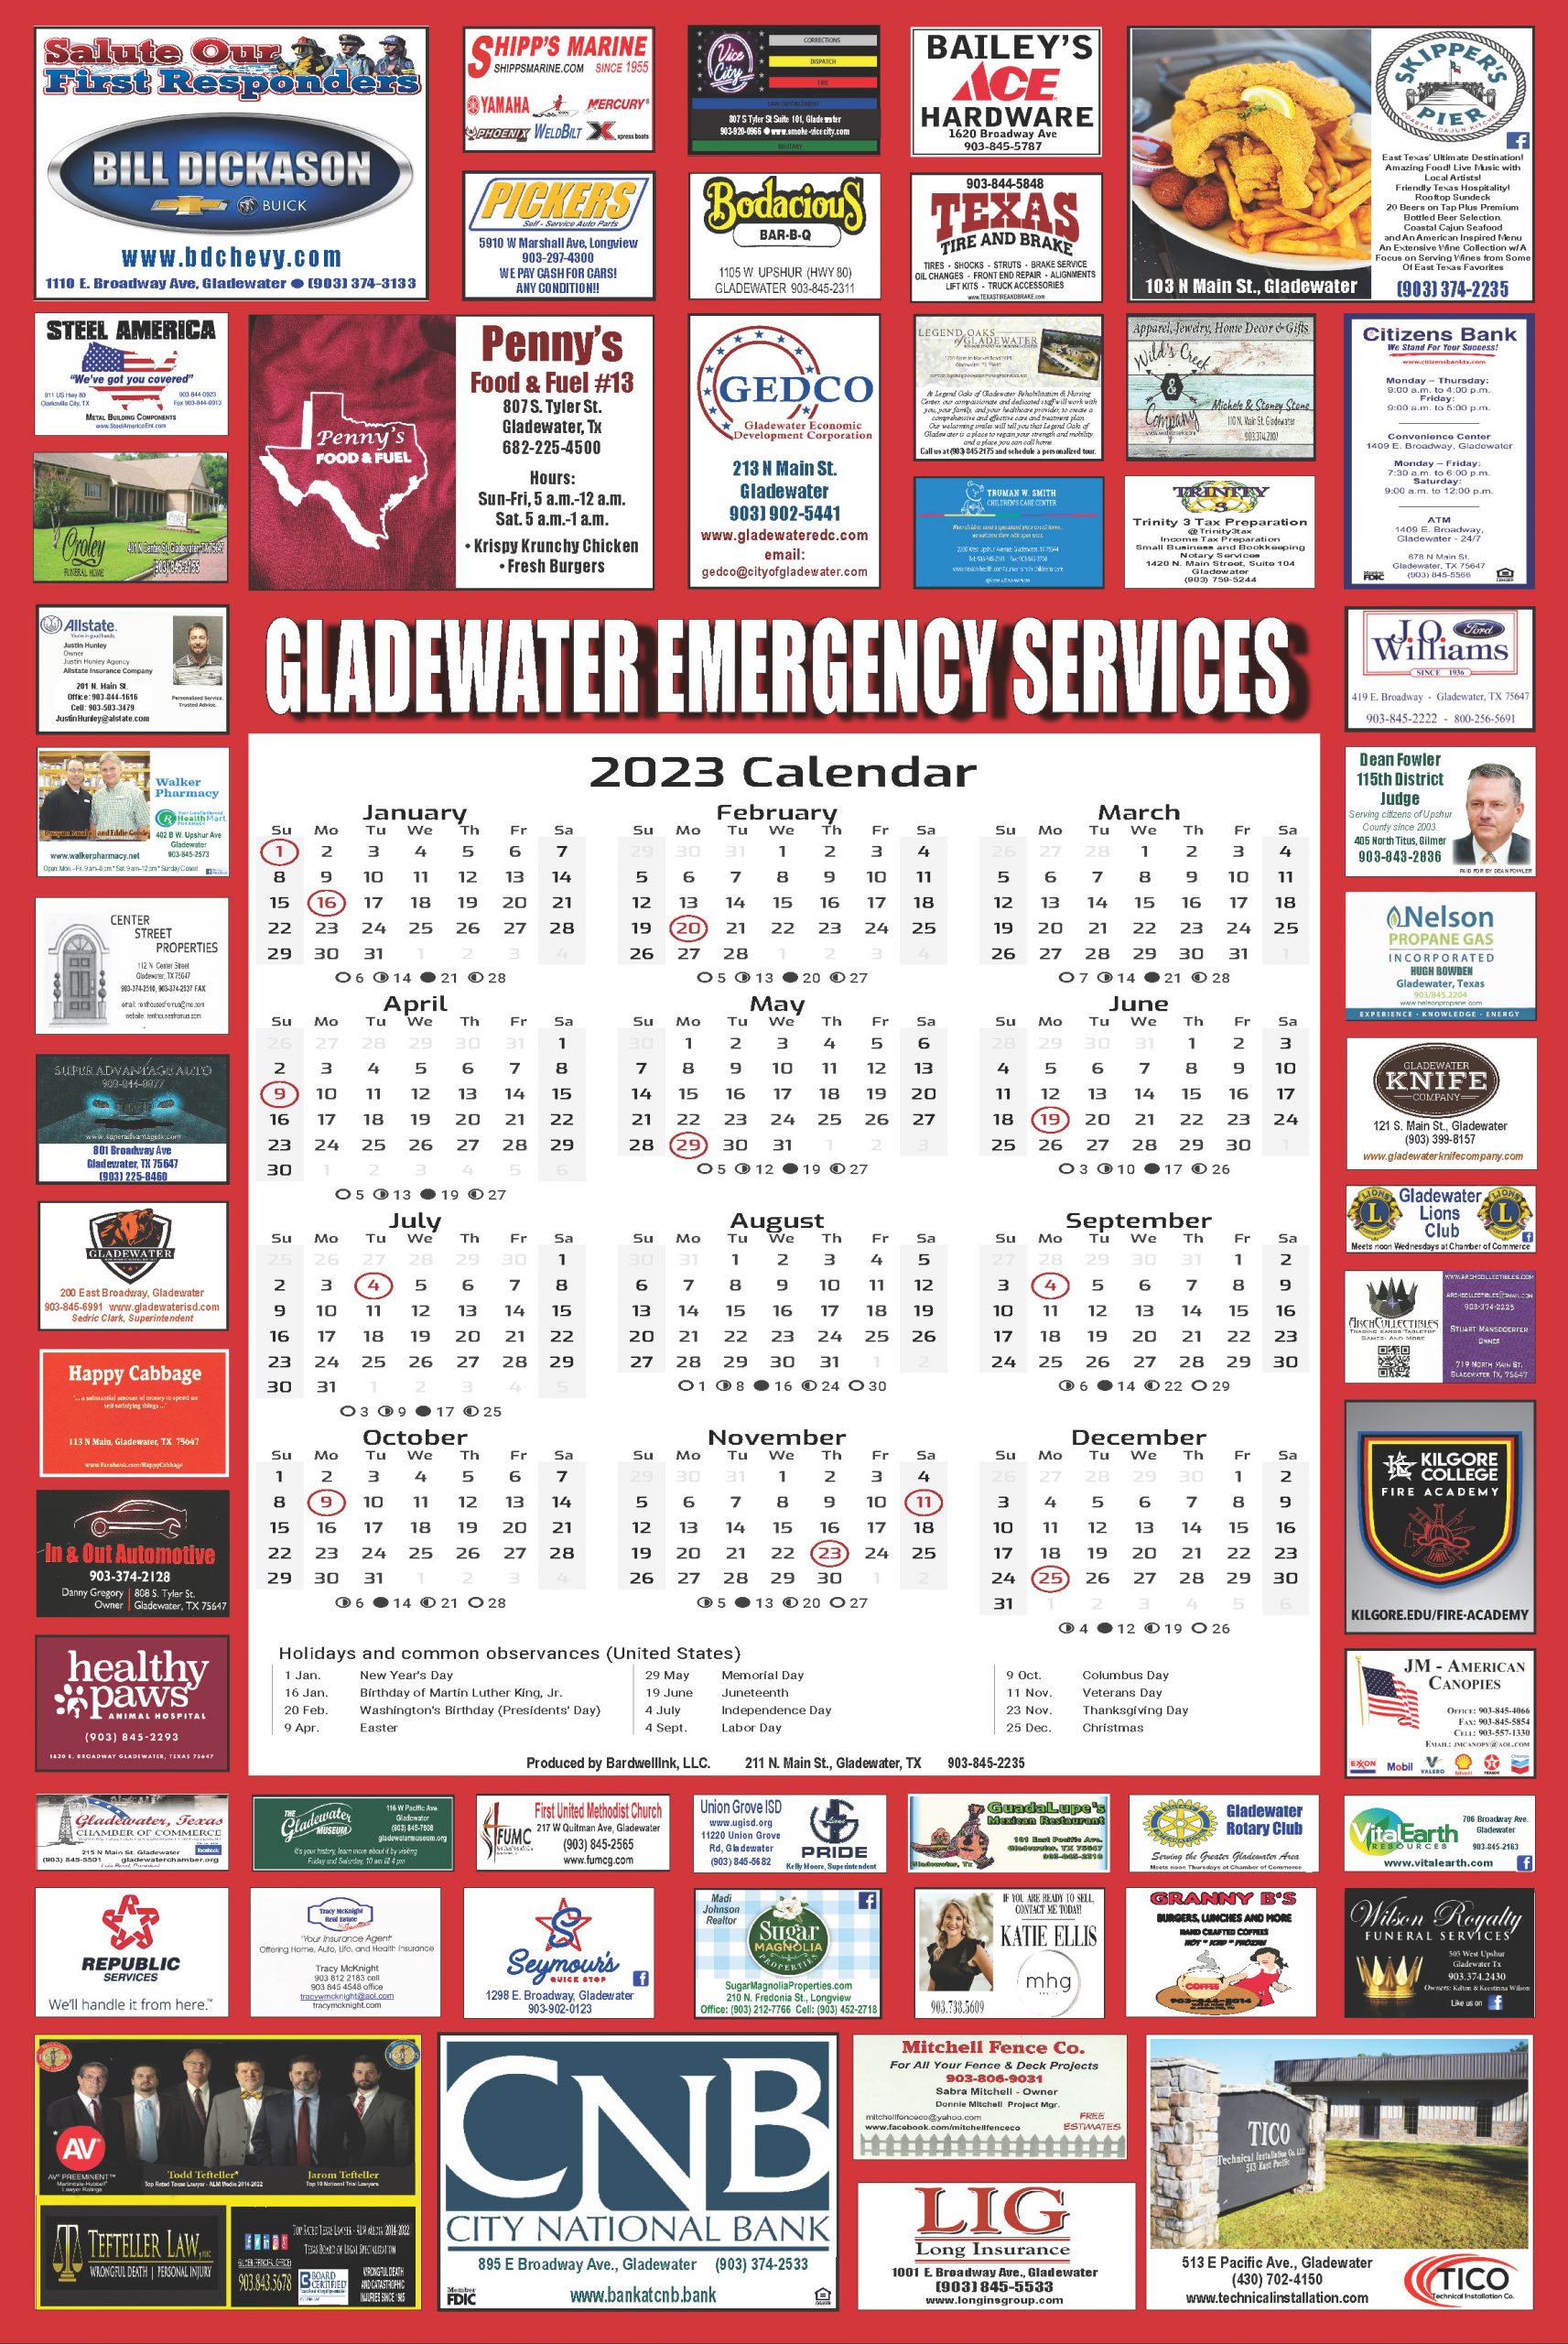 Download a PDF copy of this year's Emergency Services Calendar